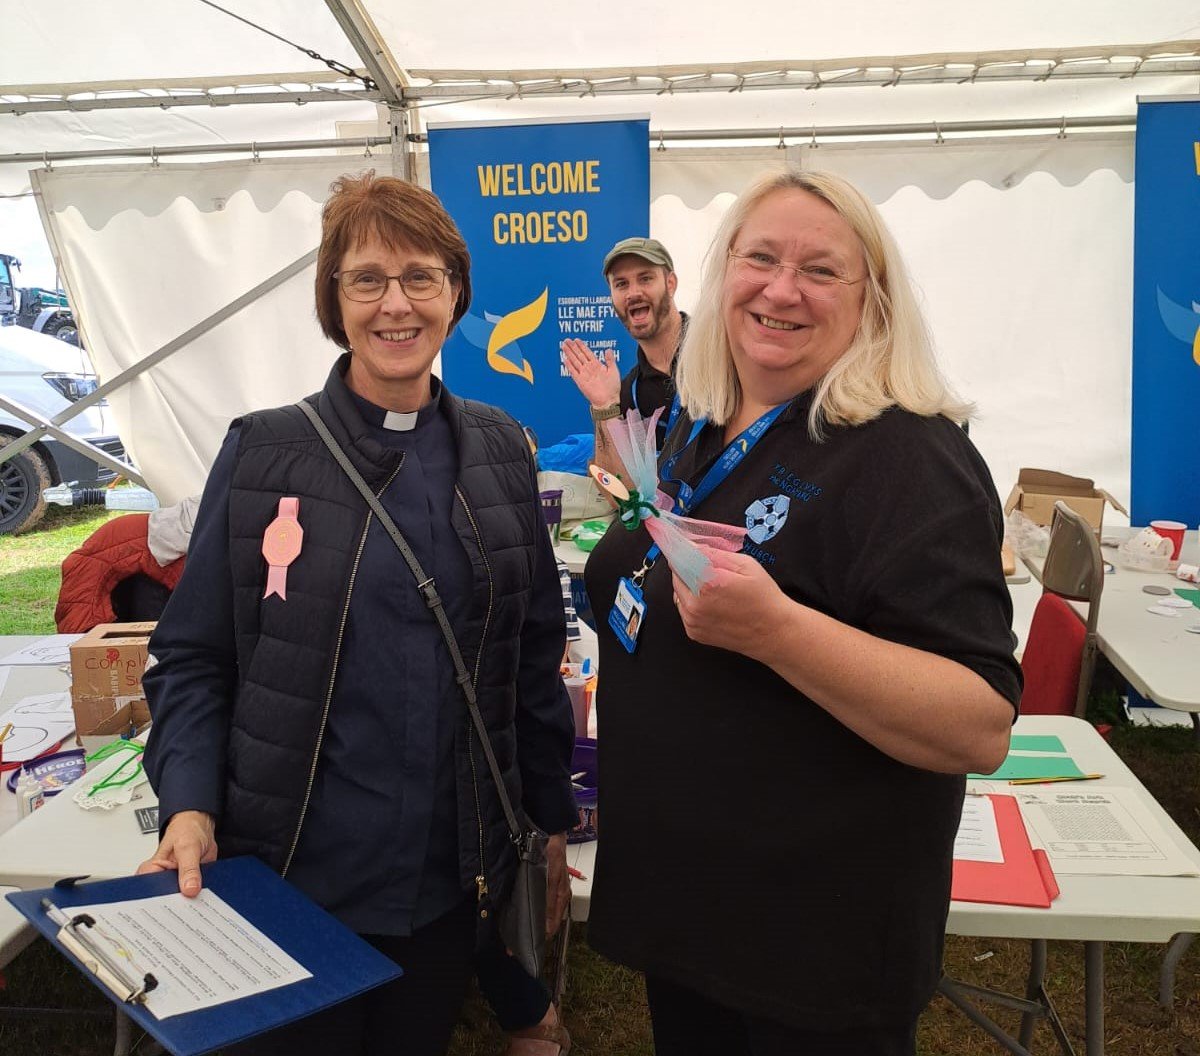 Rev'd Victoria and Growth Enablers Angela and Joe wave from Diocesan stall at the Vale of Glamorgan County Show